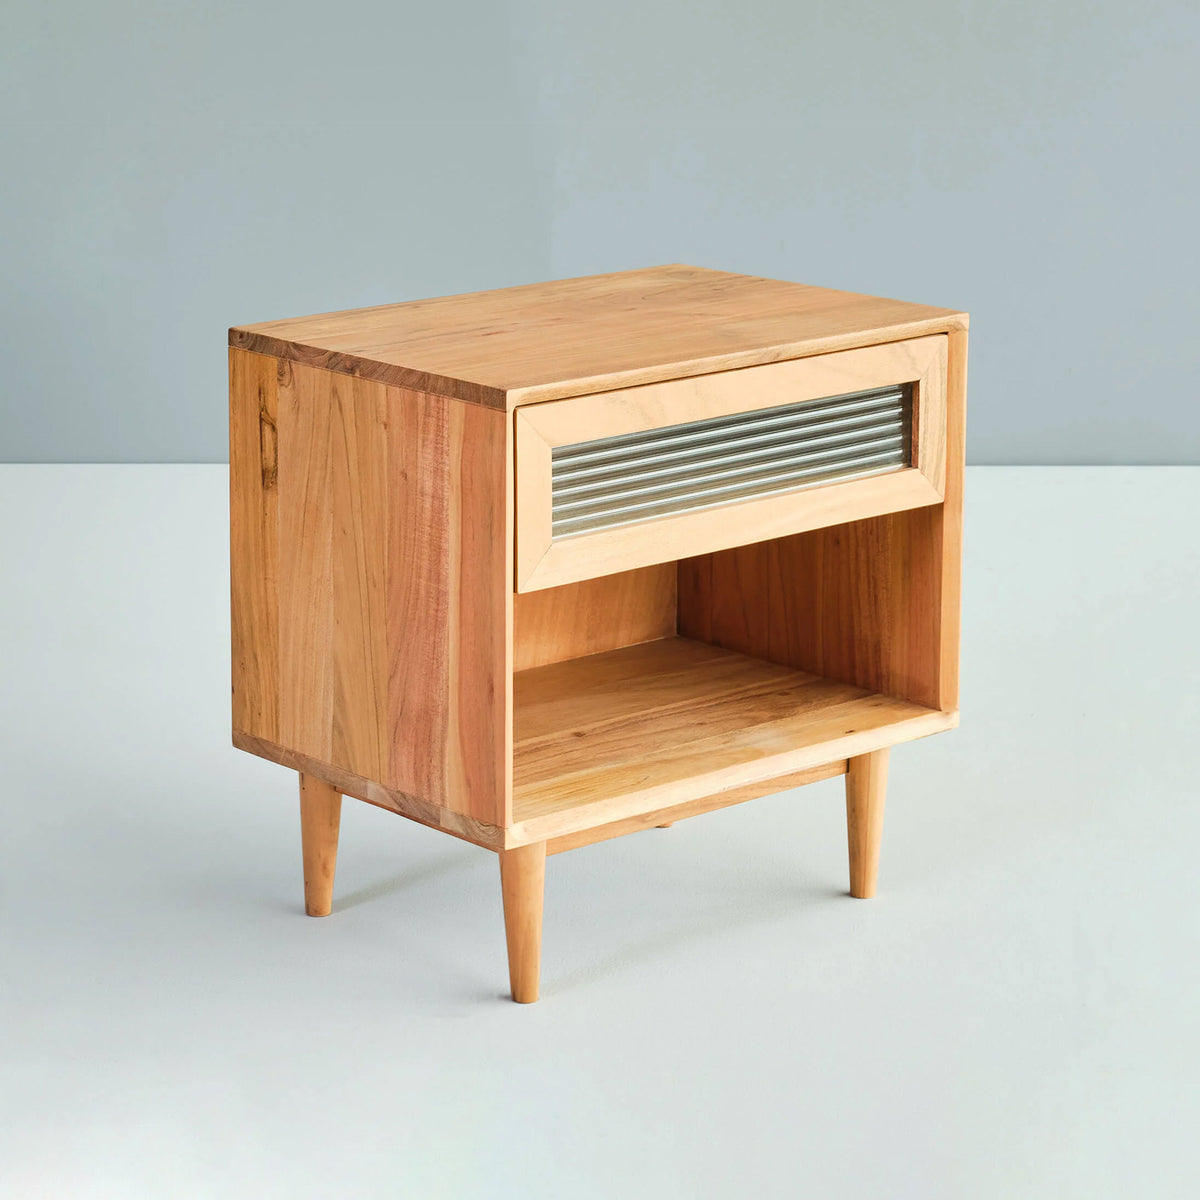 Paolo Bedside Table